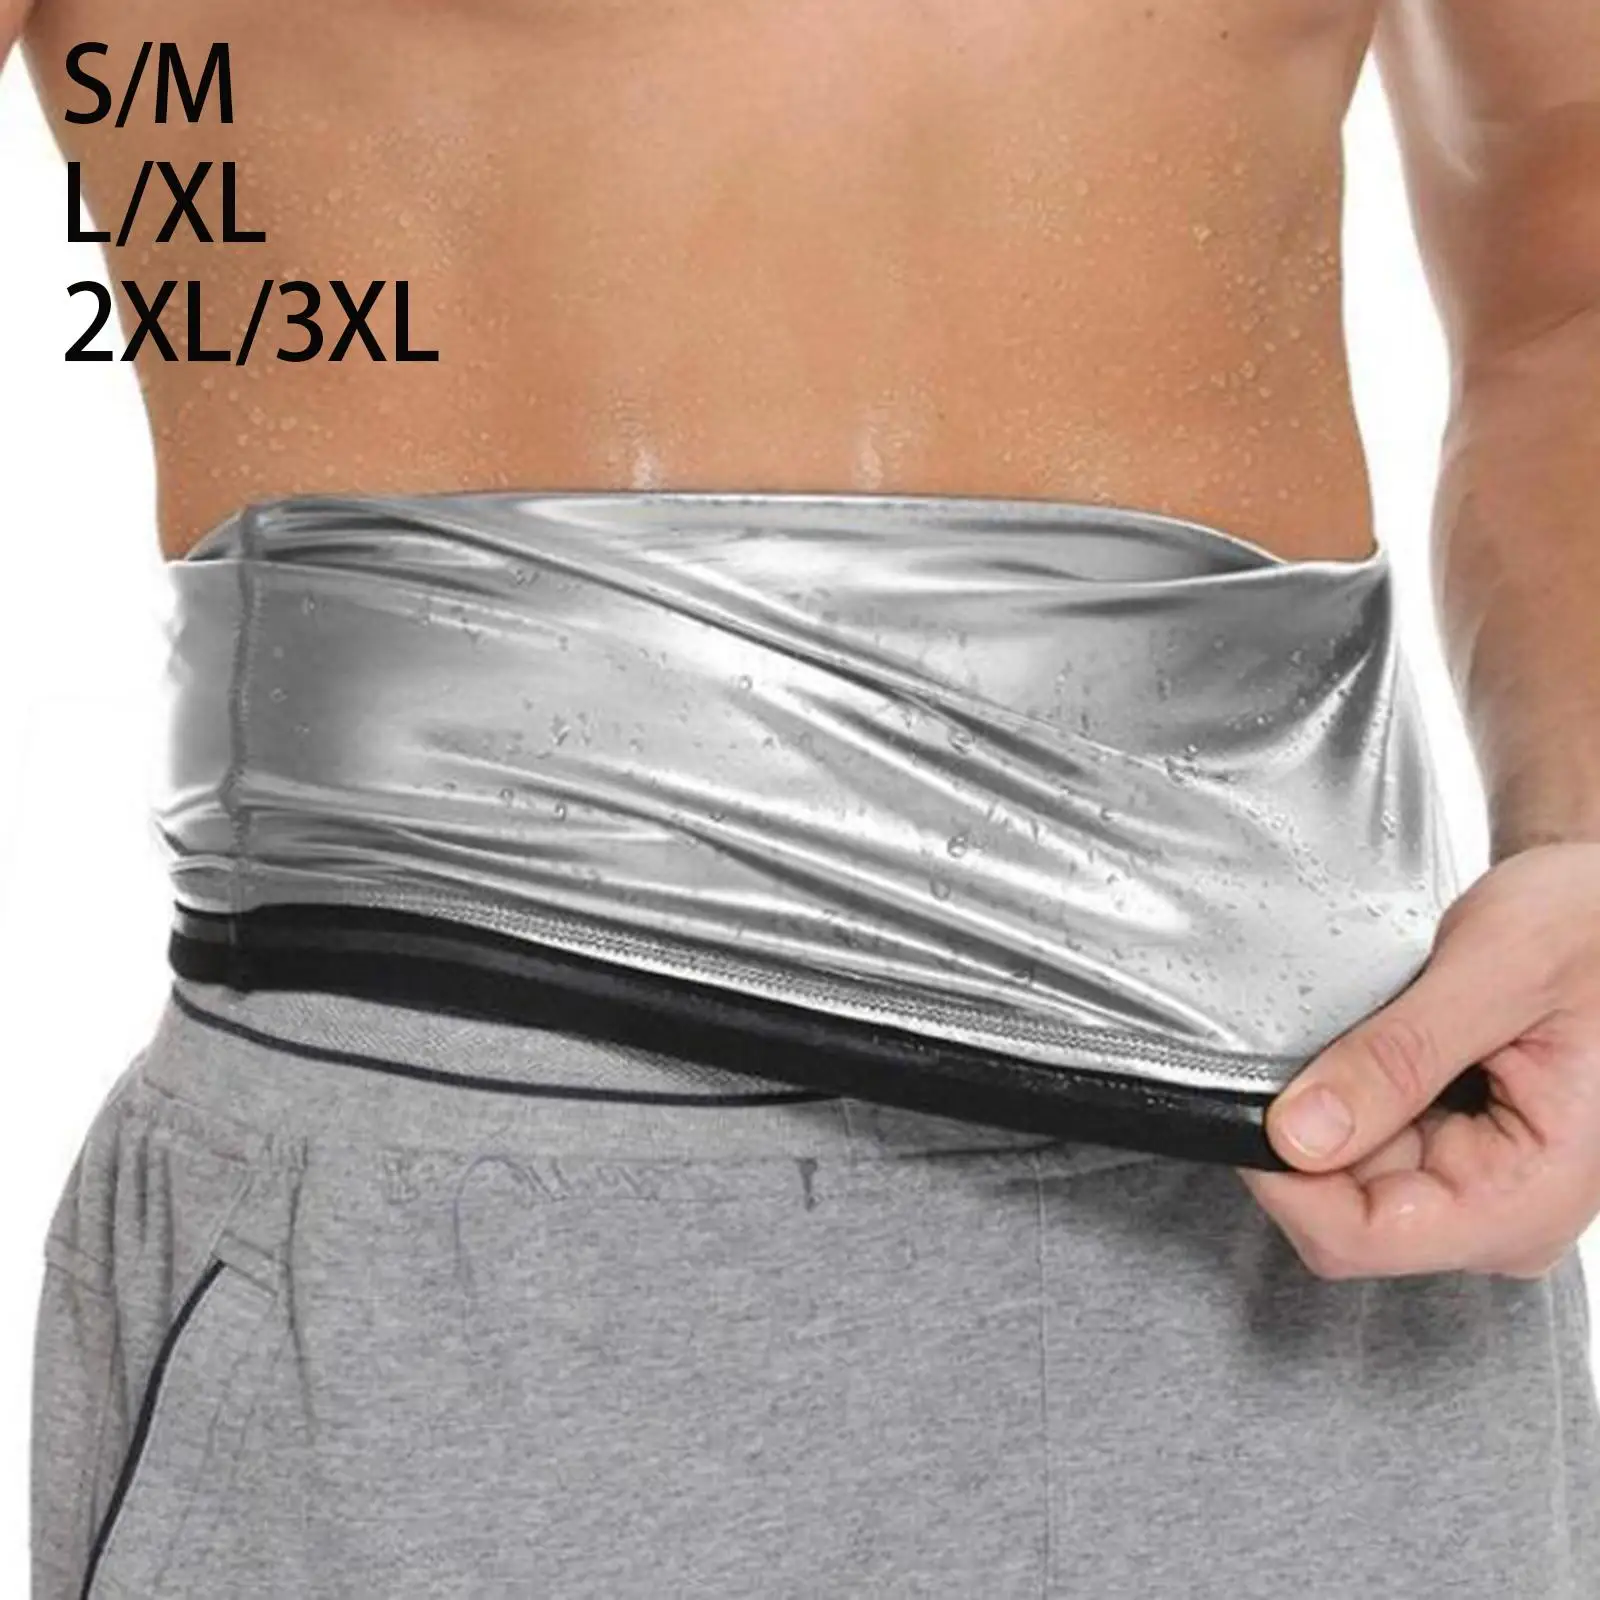 Waist Trimmer Toning Belt Abdominal Trainer Low Back and Abdominal Support Sauna Belt for Yoga Workout Pilates Fitness Exercise